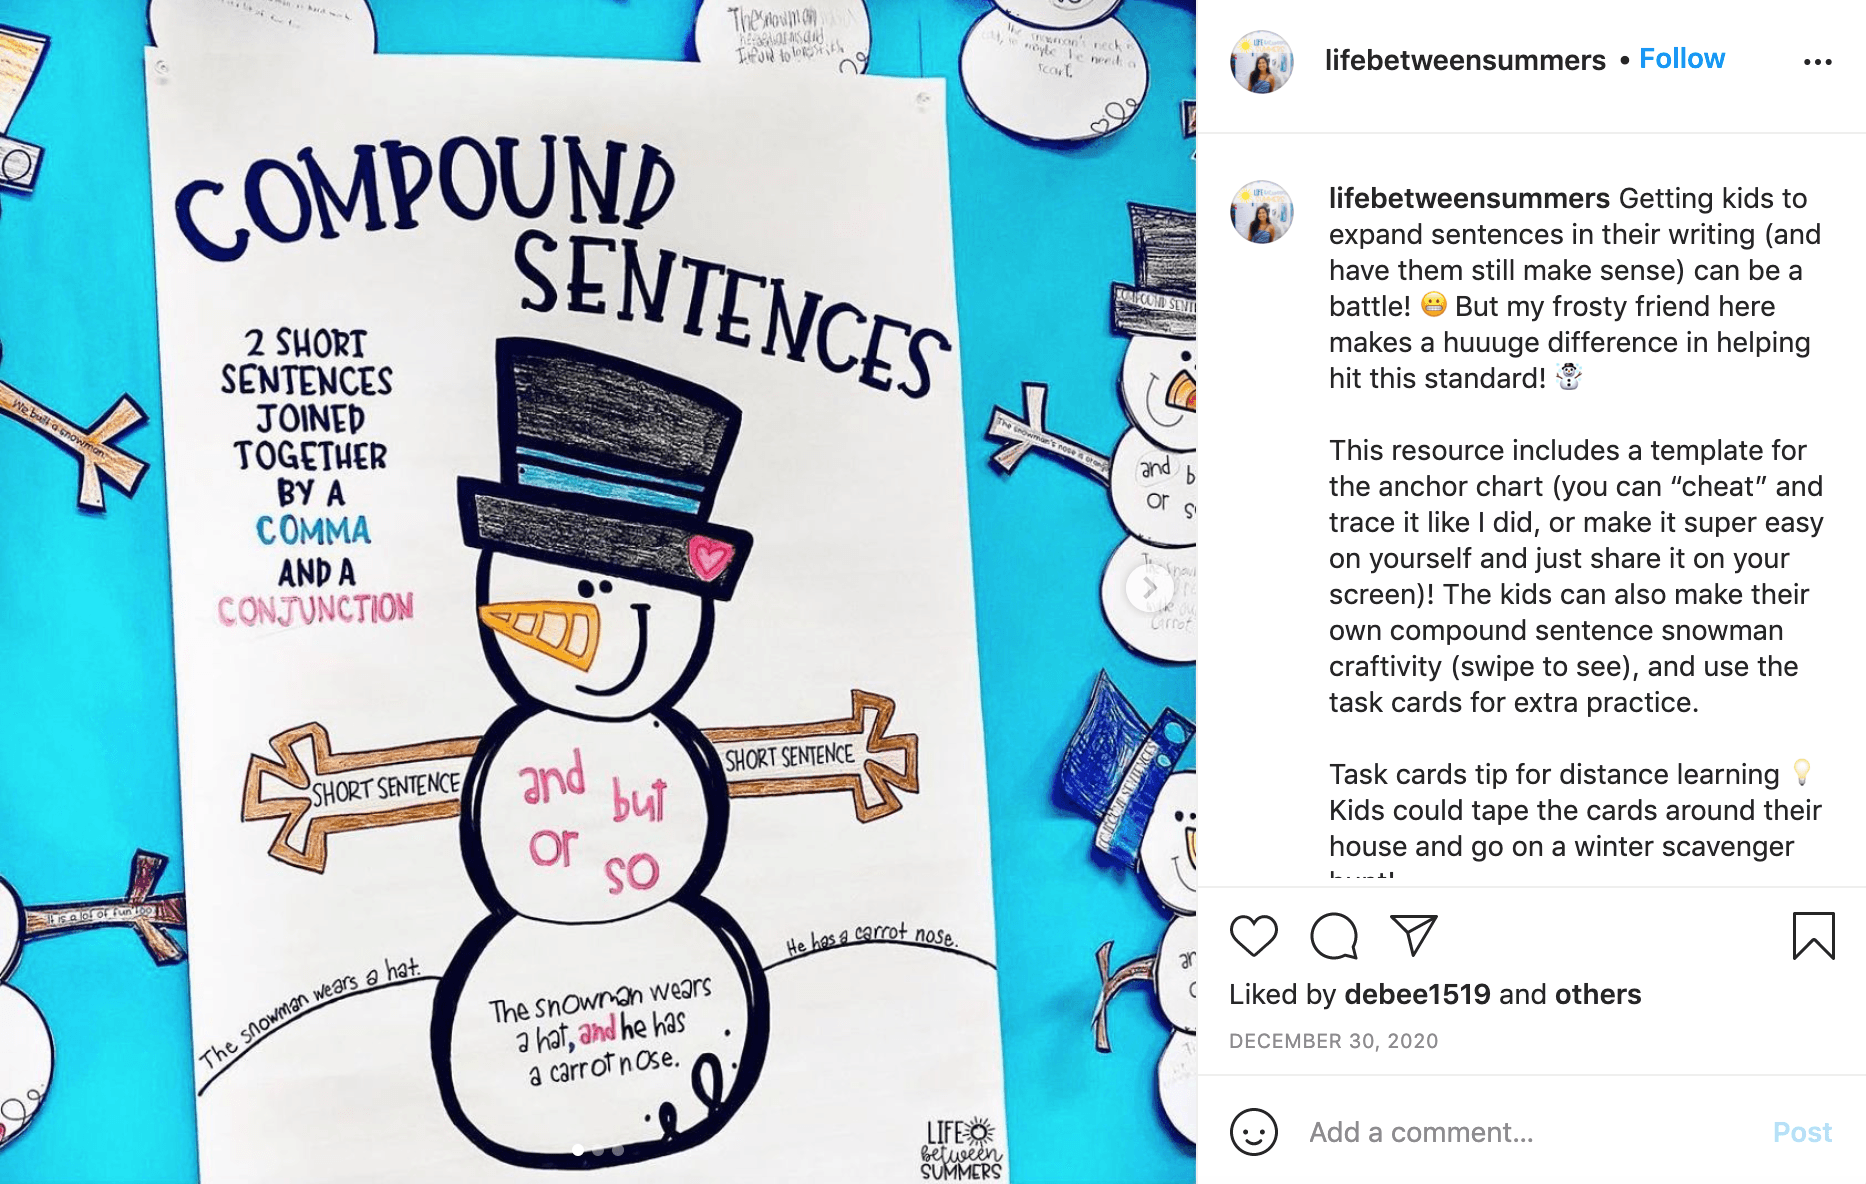 An Instagram post from Shannon Olsen, showing a poster with the heading "Compound Sentences." A drawing of a snowman helps illustrate the concept. An excerpt from the caption says, "Getting kids to expand sentences in their writing (and still have them make sense) can be a battle! But my frosty friend here makes a huuuge difference in helping hit this standard! This resources includes a template for the anchor chart!"